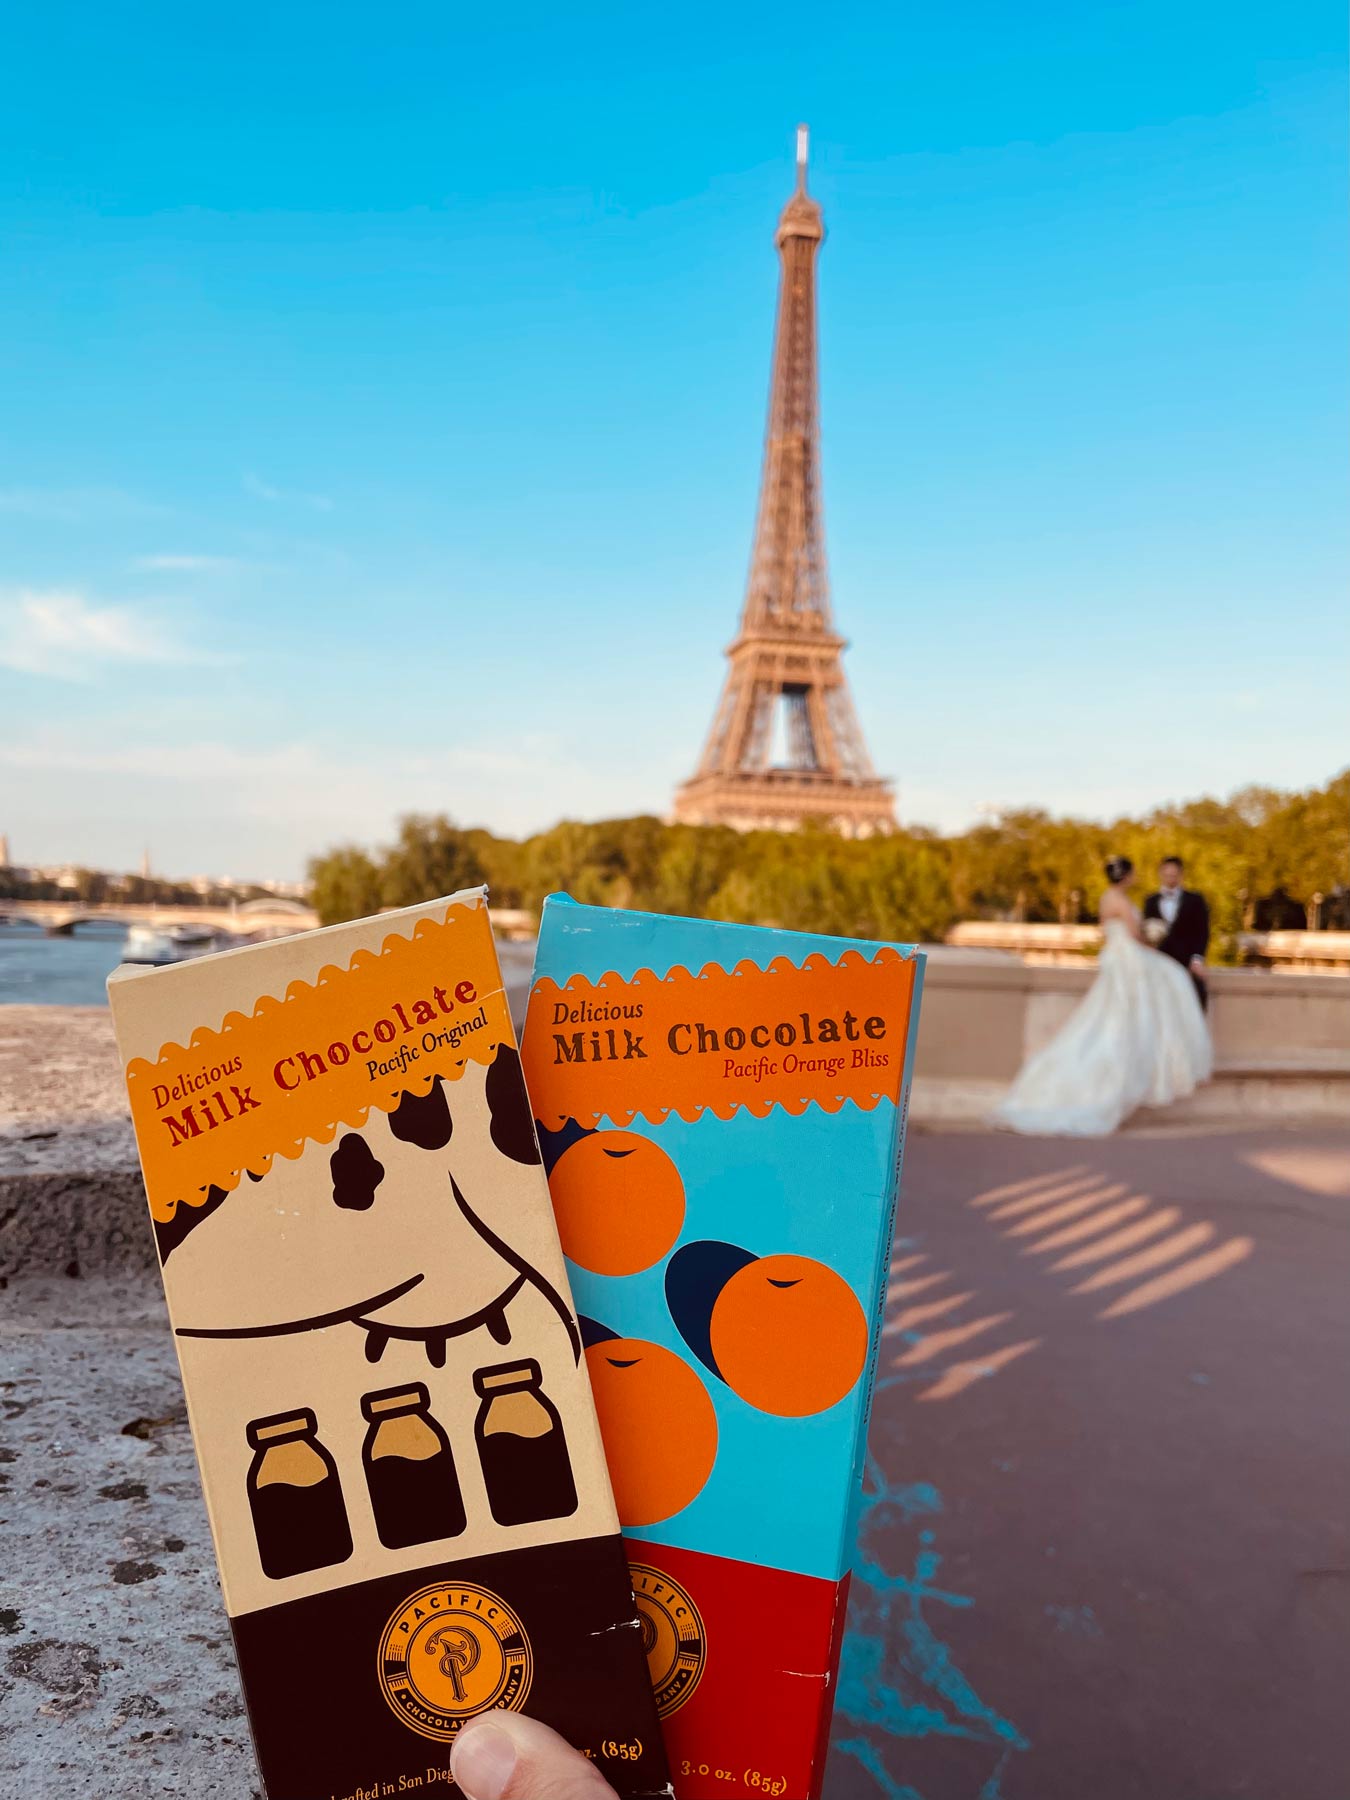 Pacific Chocolate at the Eiffel Tower